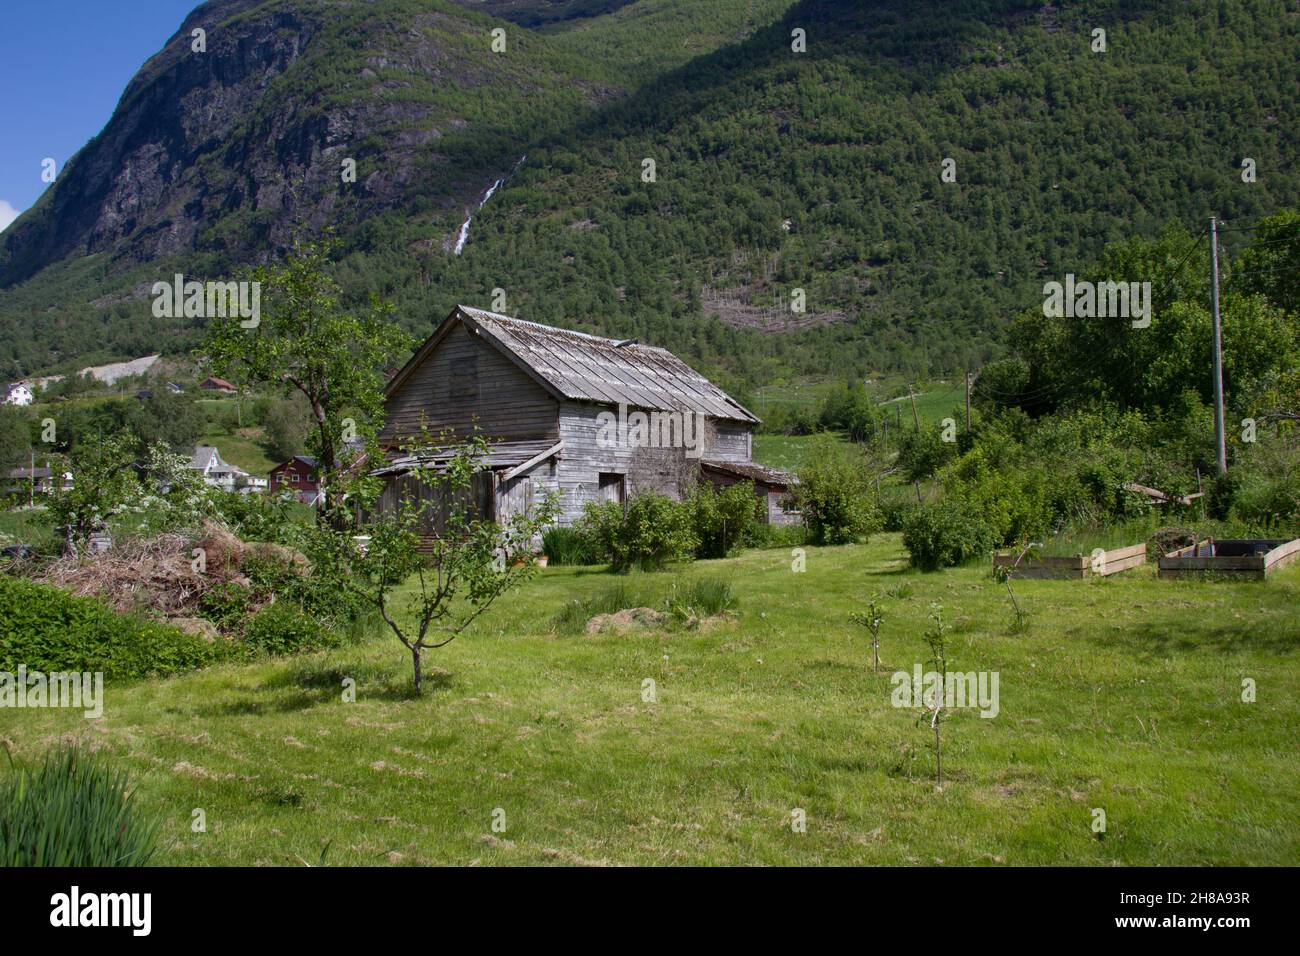 Wooden barn structure in the Oldedalen near Olden, Norway.  Sogn og Fjordane county. Stock Photo